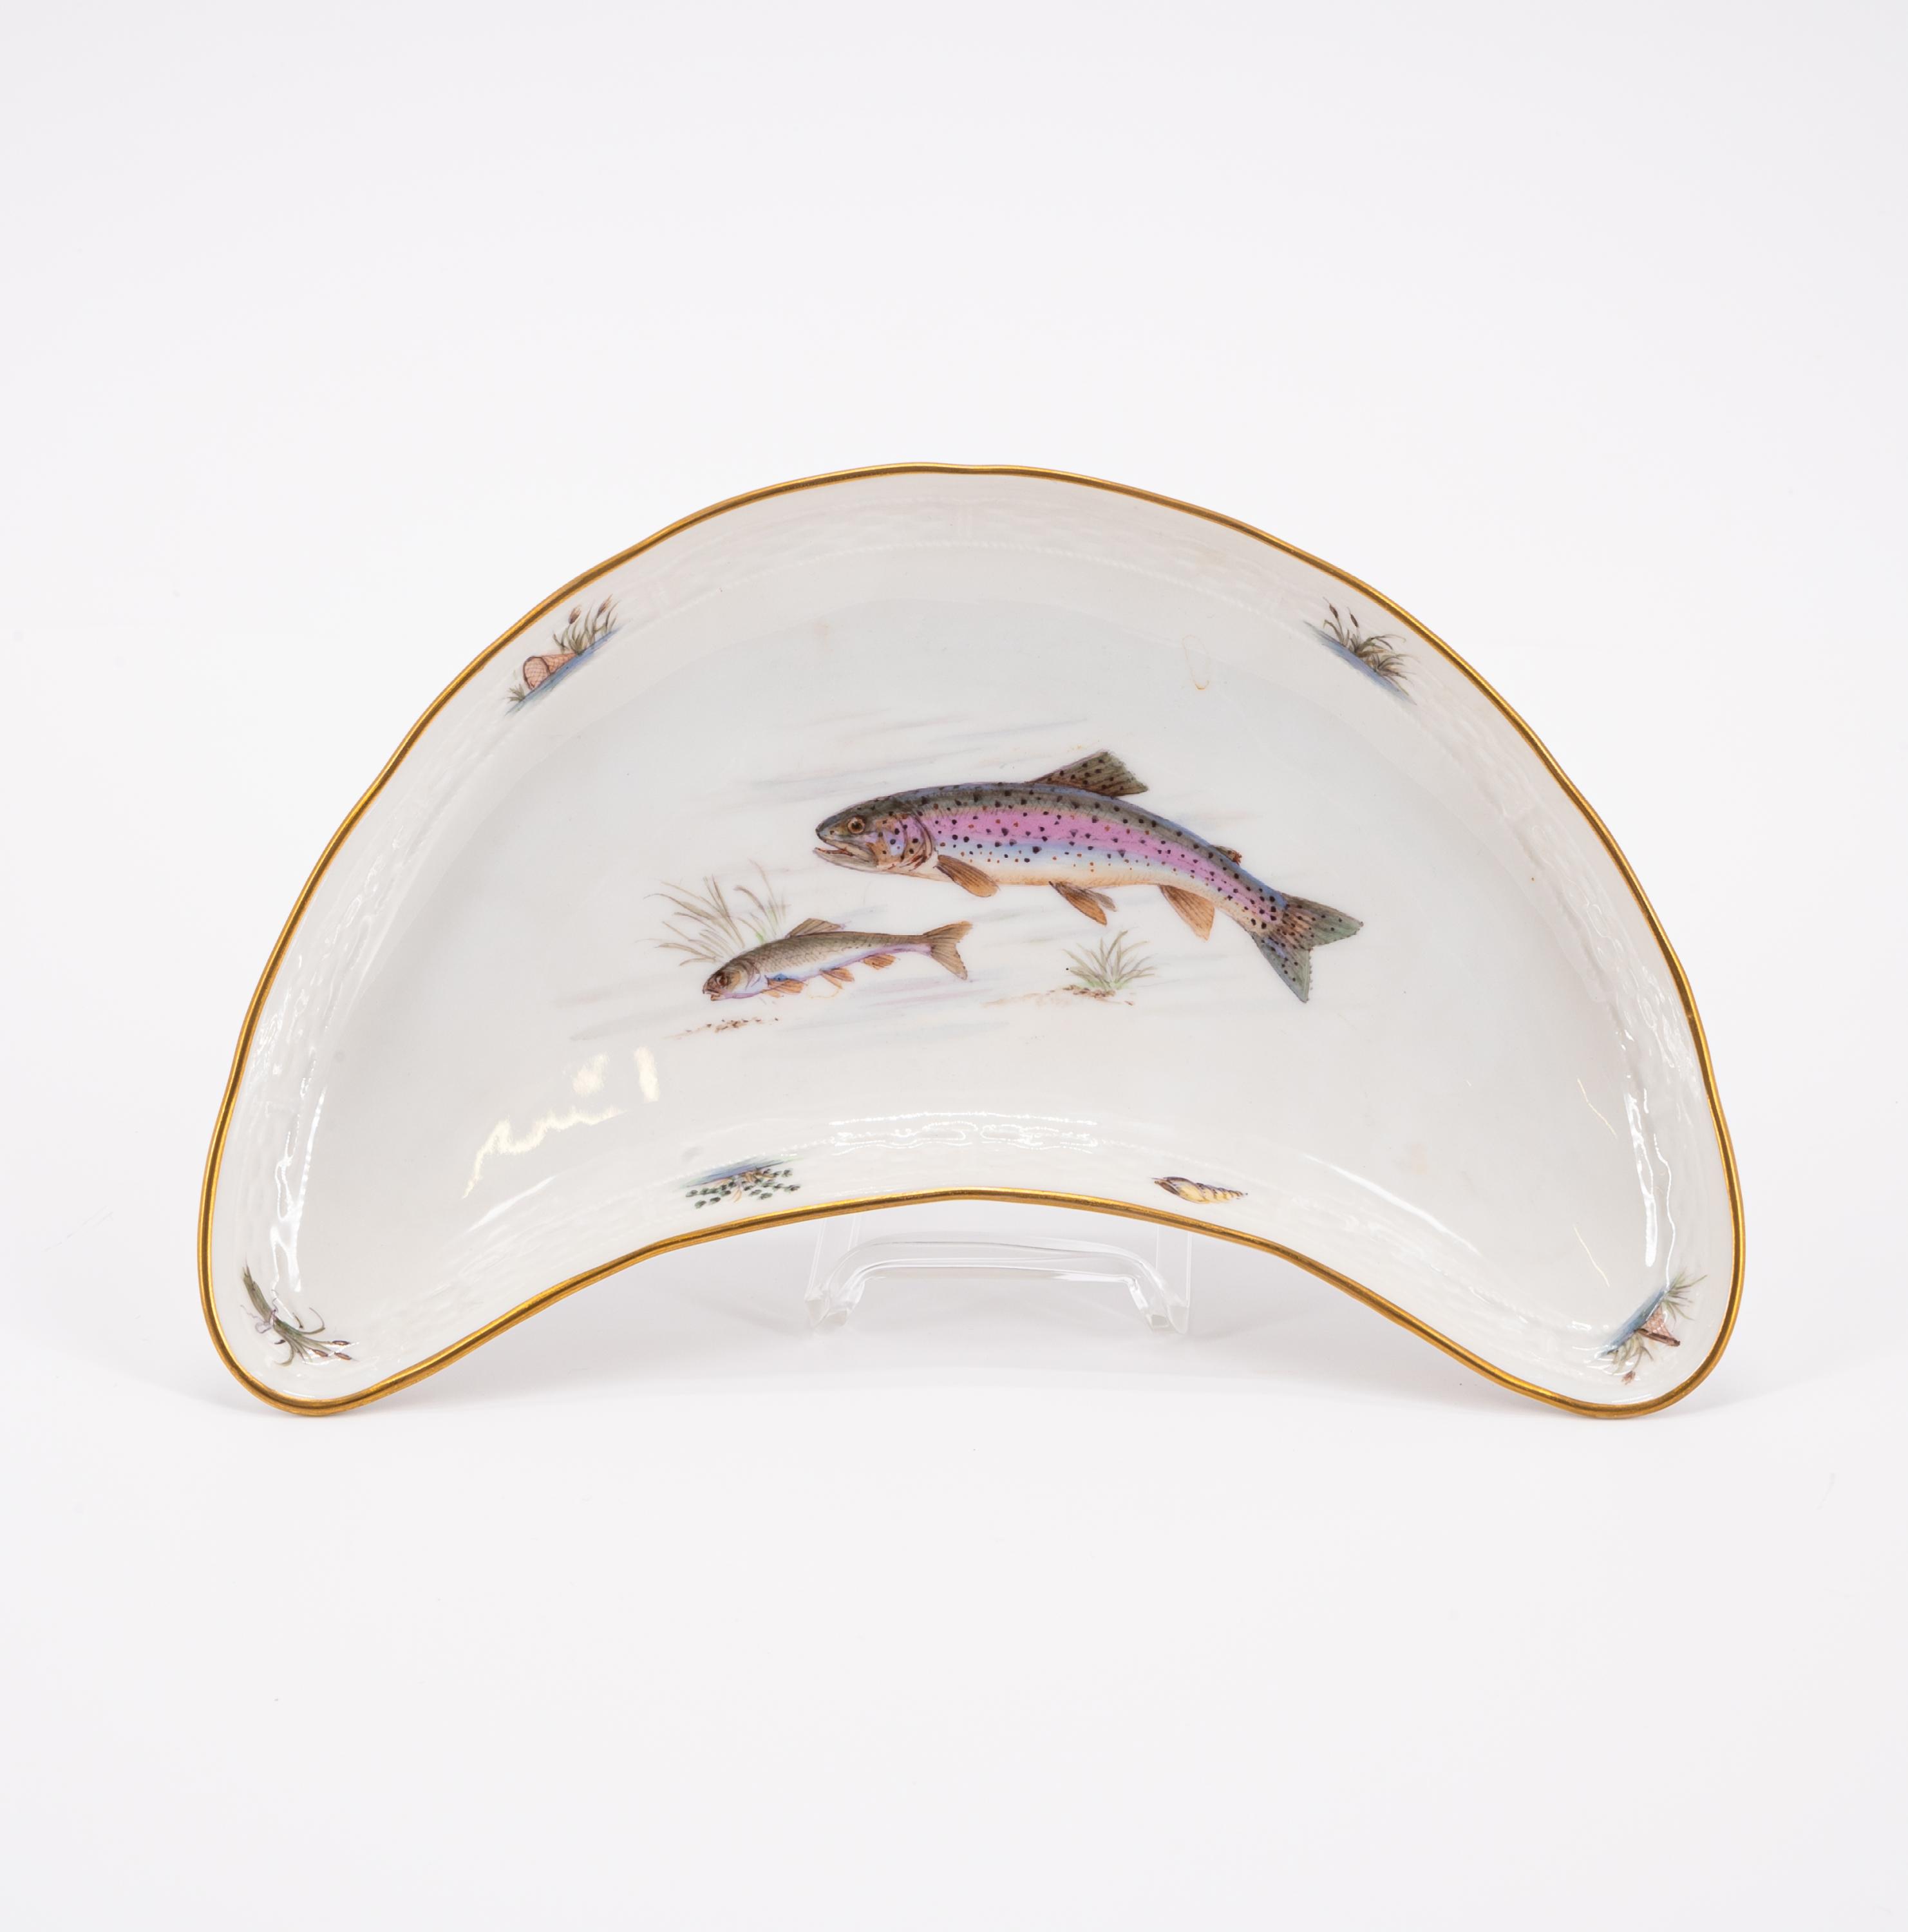 PORCELAIN FISH SERVICE FOR 14 PEOPLE - Image 8 of 9